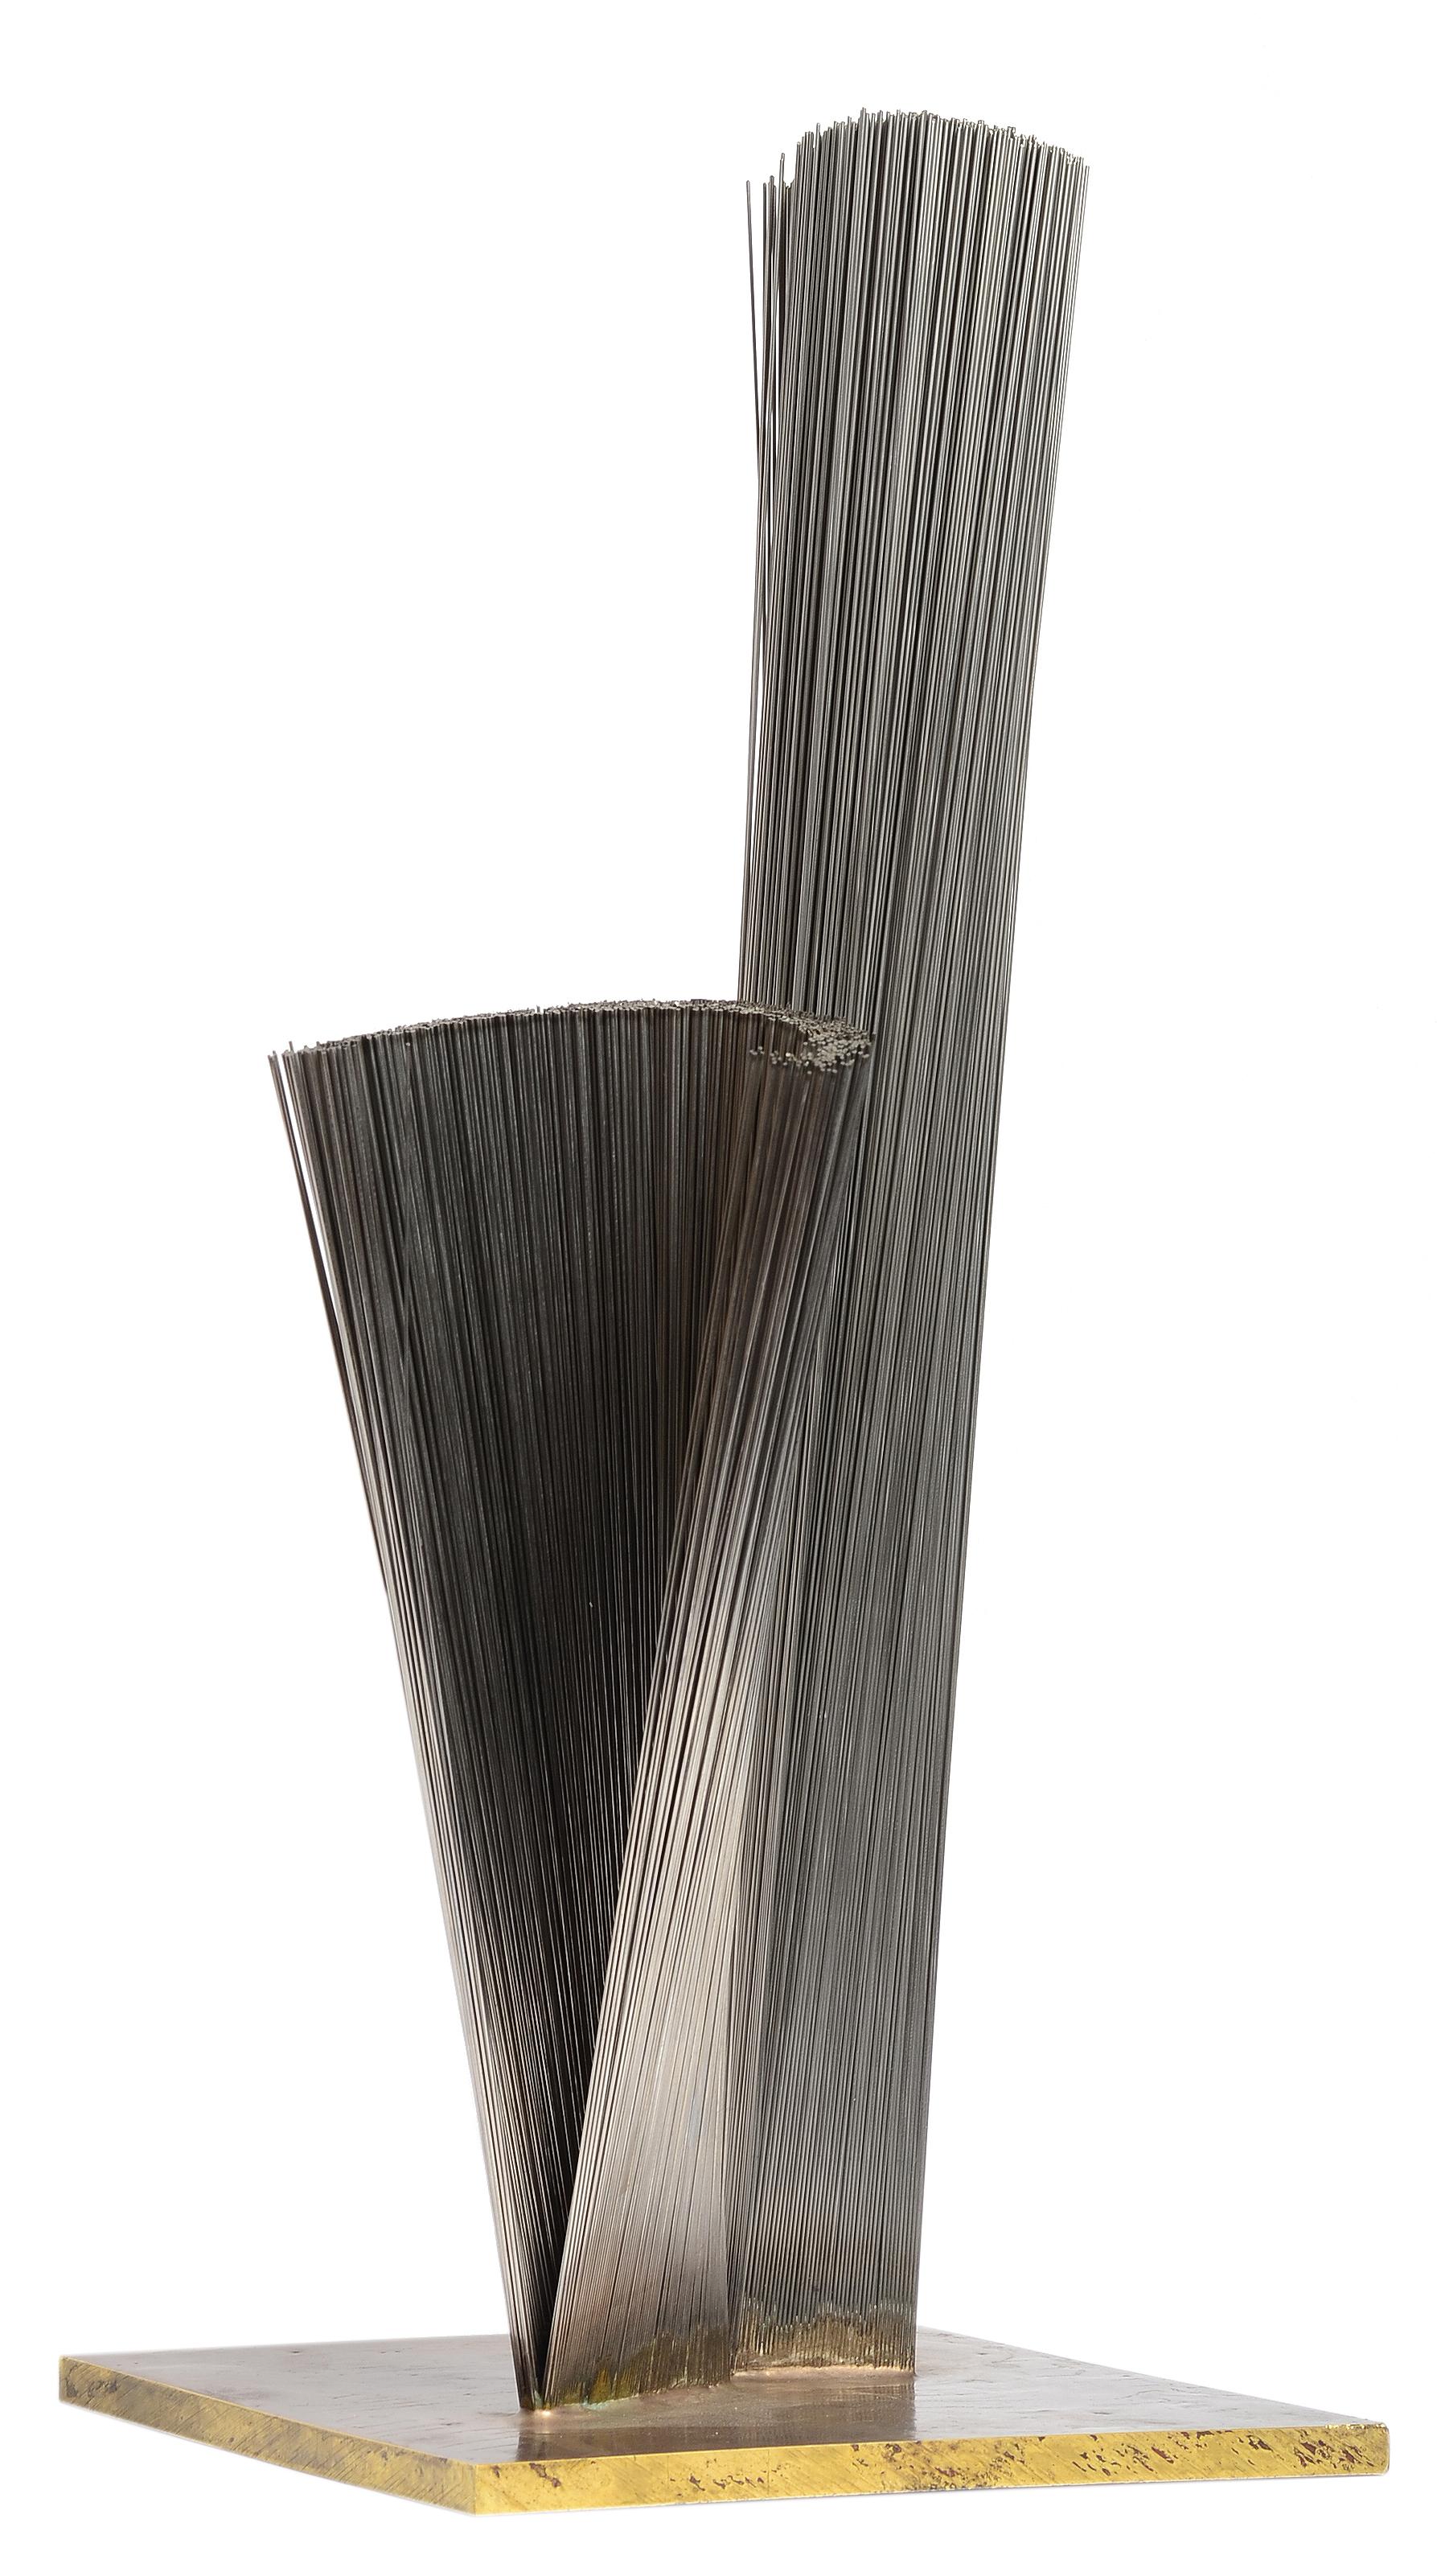 An outstanding example of Harry Bertoia's bundled wire sculptures.

This example is one of the largest tabletop versions he ever created. Thousands of thin stainless steel wire bundled and welded together onto a solid naval brass base. 

Two